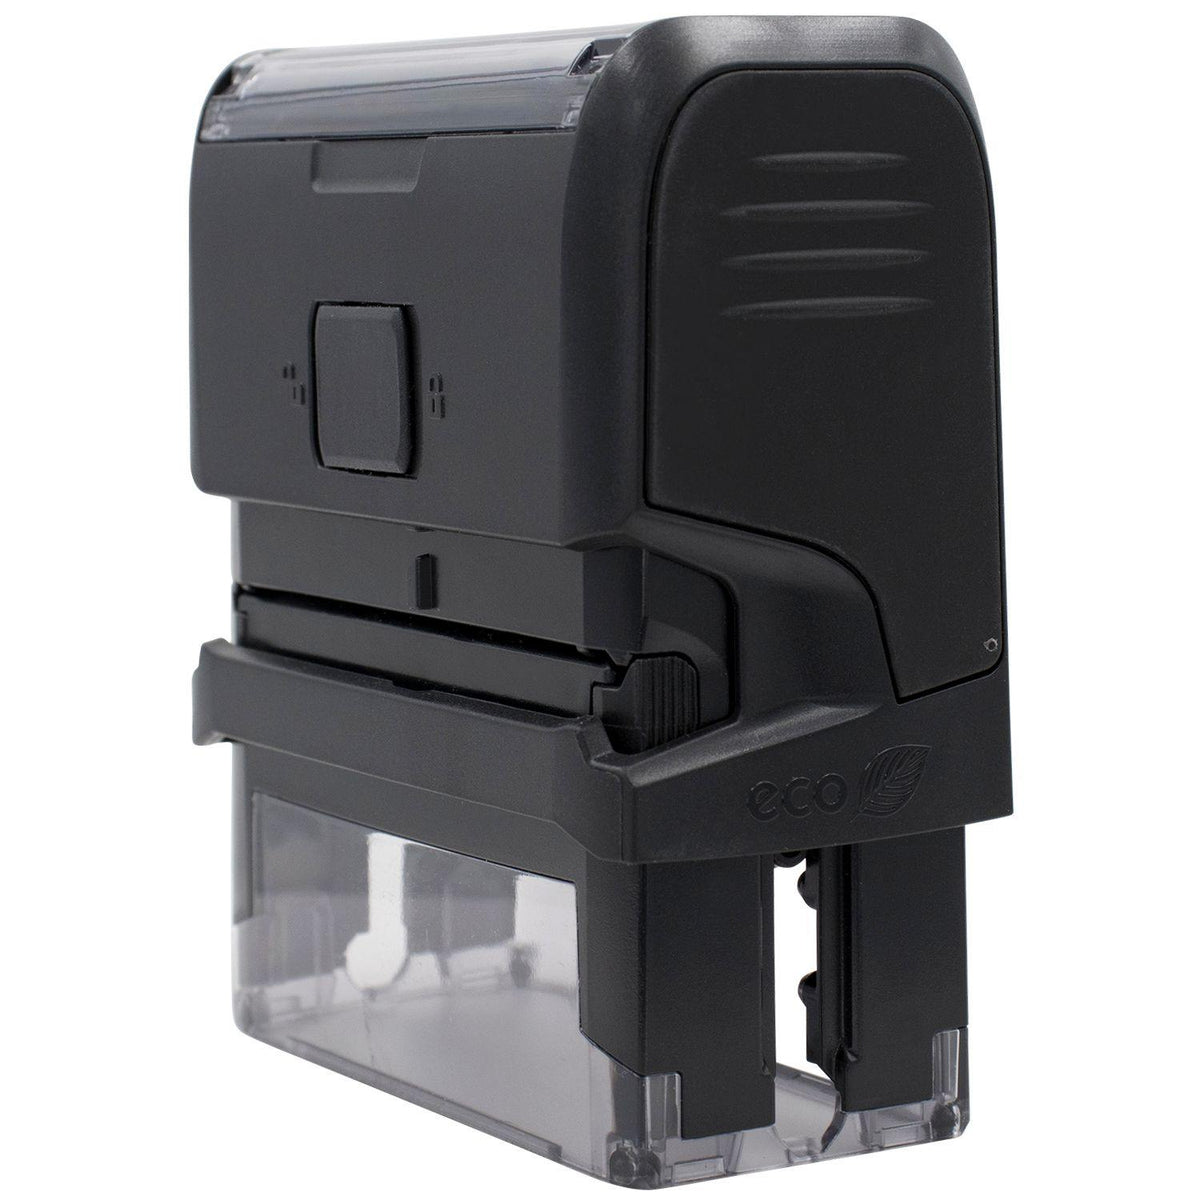 Side View of Large Self Inking Bold Revised Stamp at an Angle